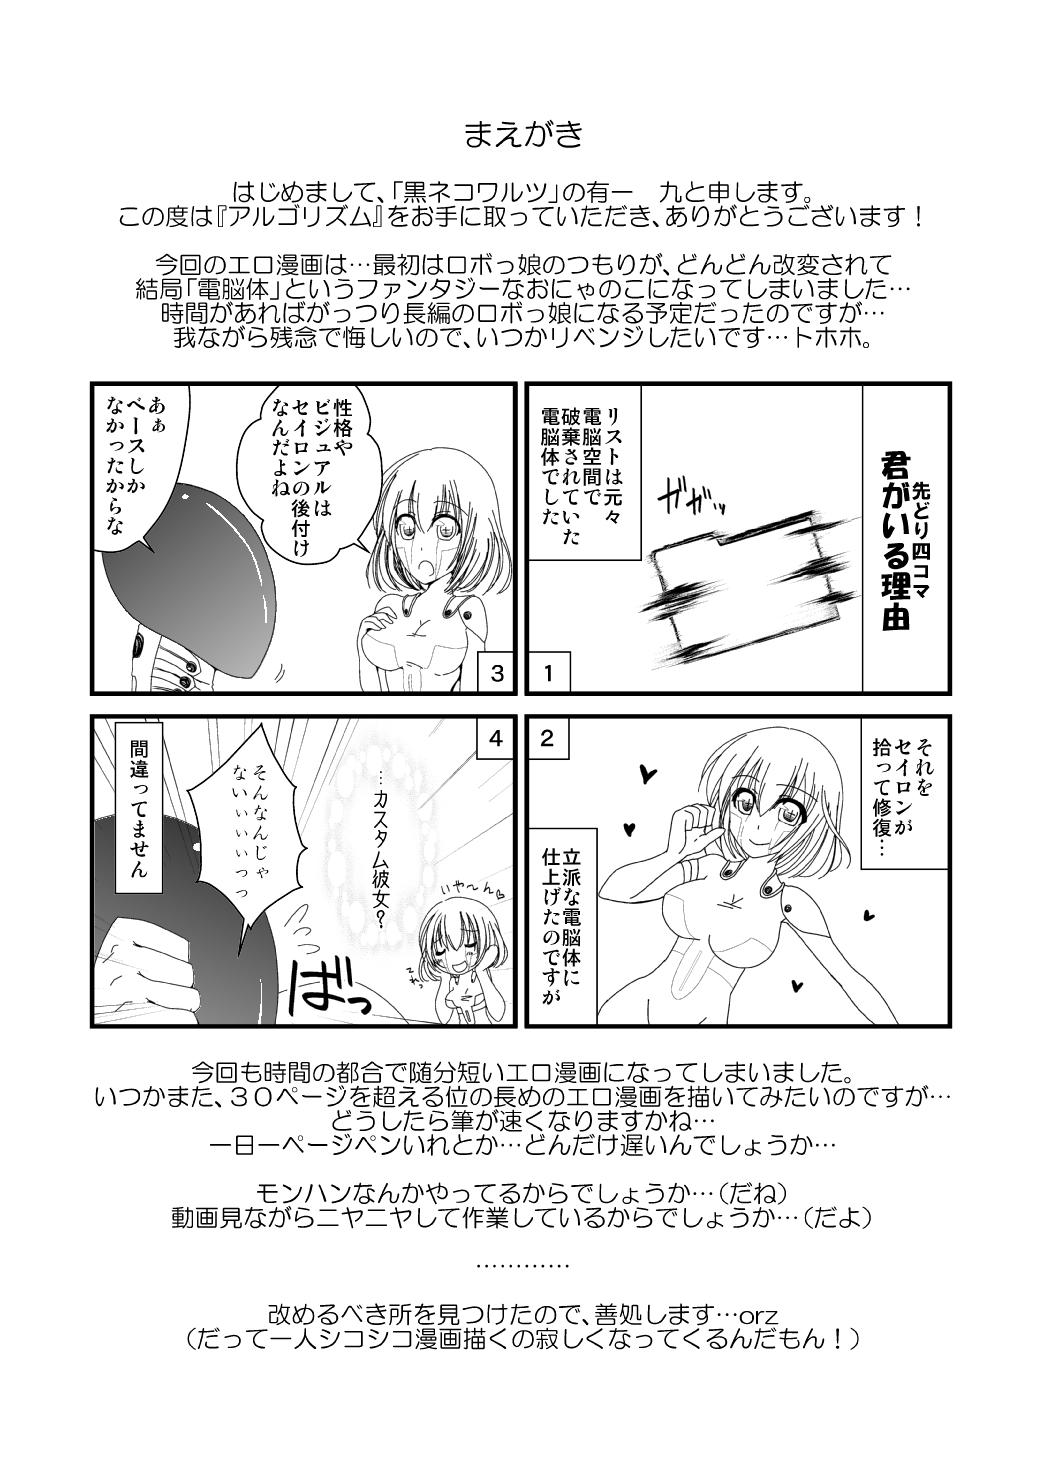 Sexo アルゴリズム 3some - Page 4